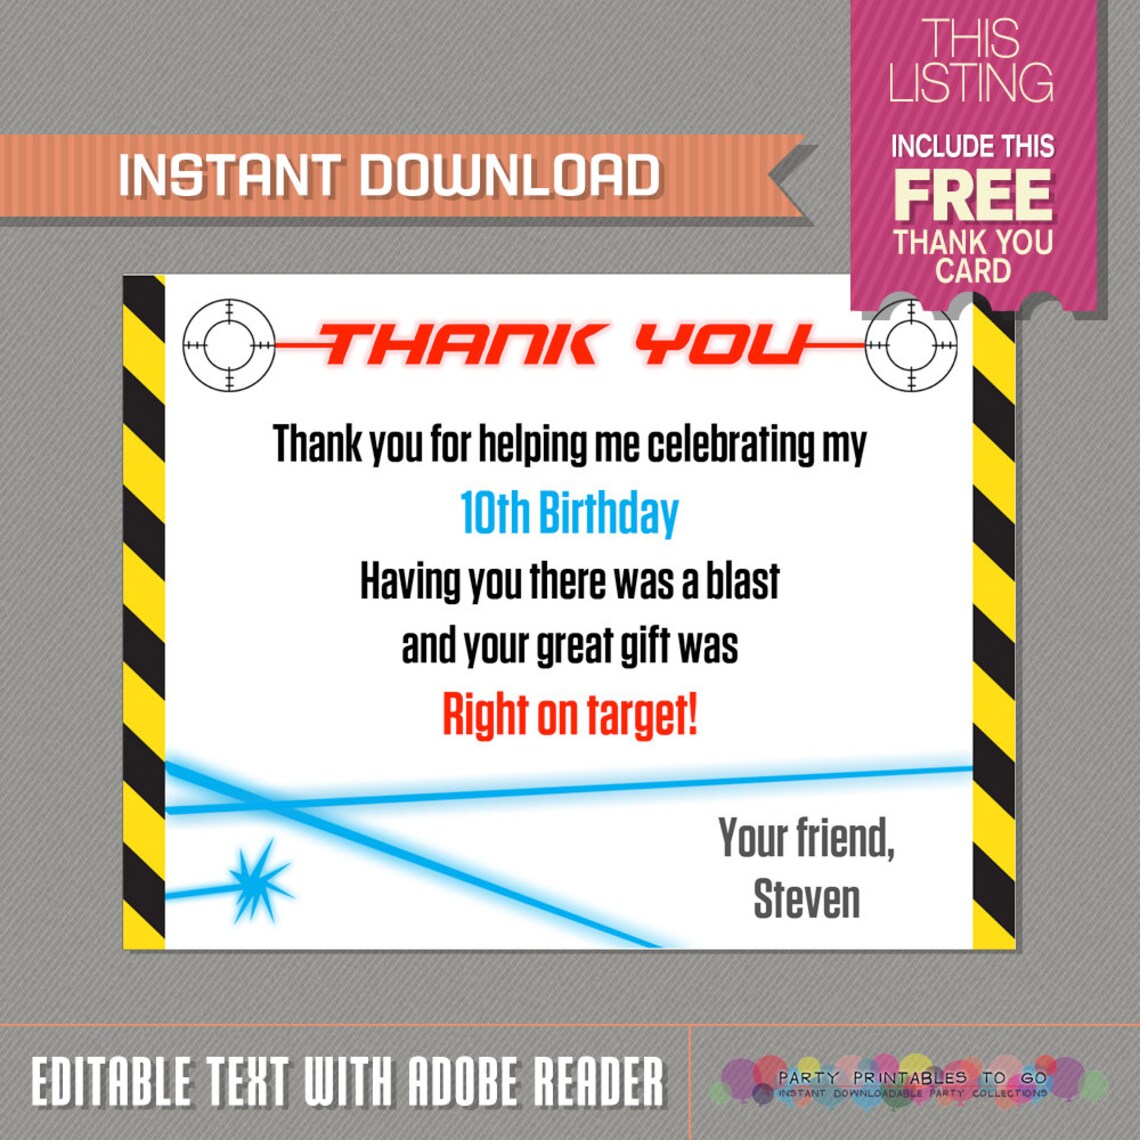 laser-tag-invitation-with-free-thank-you-card-laser-tag-etsy